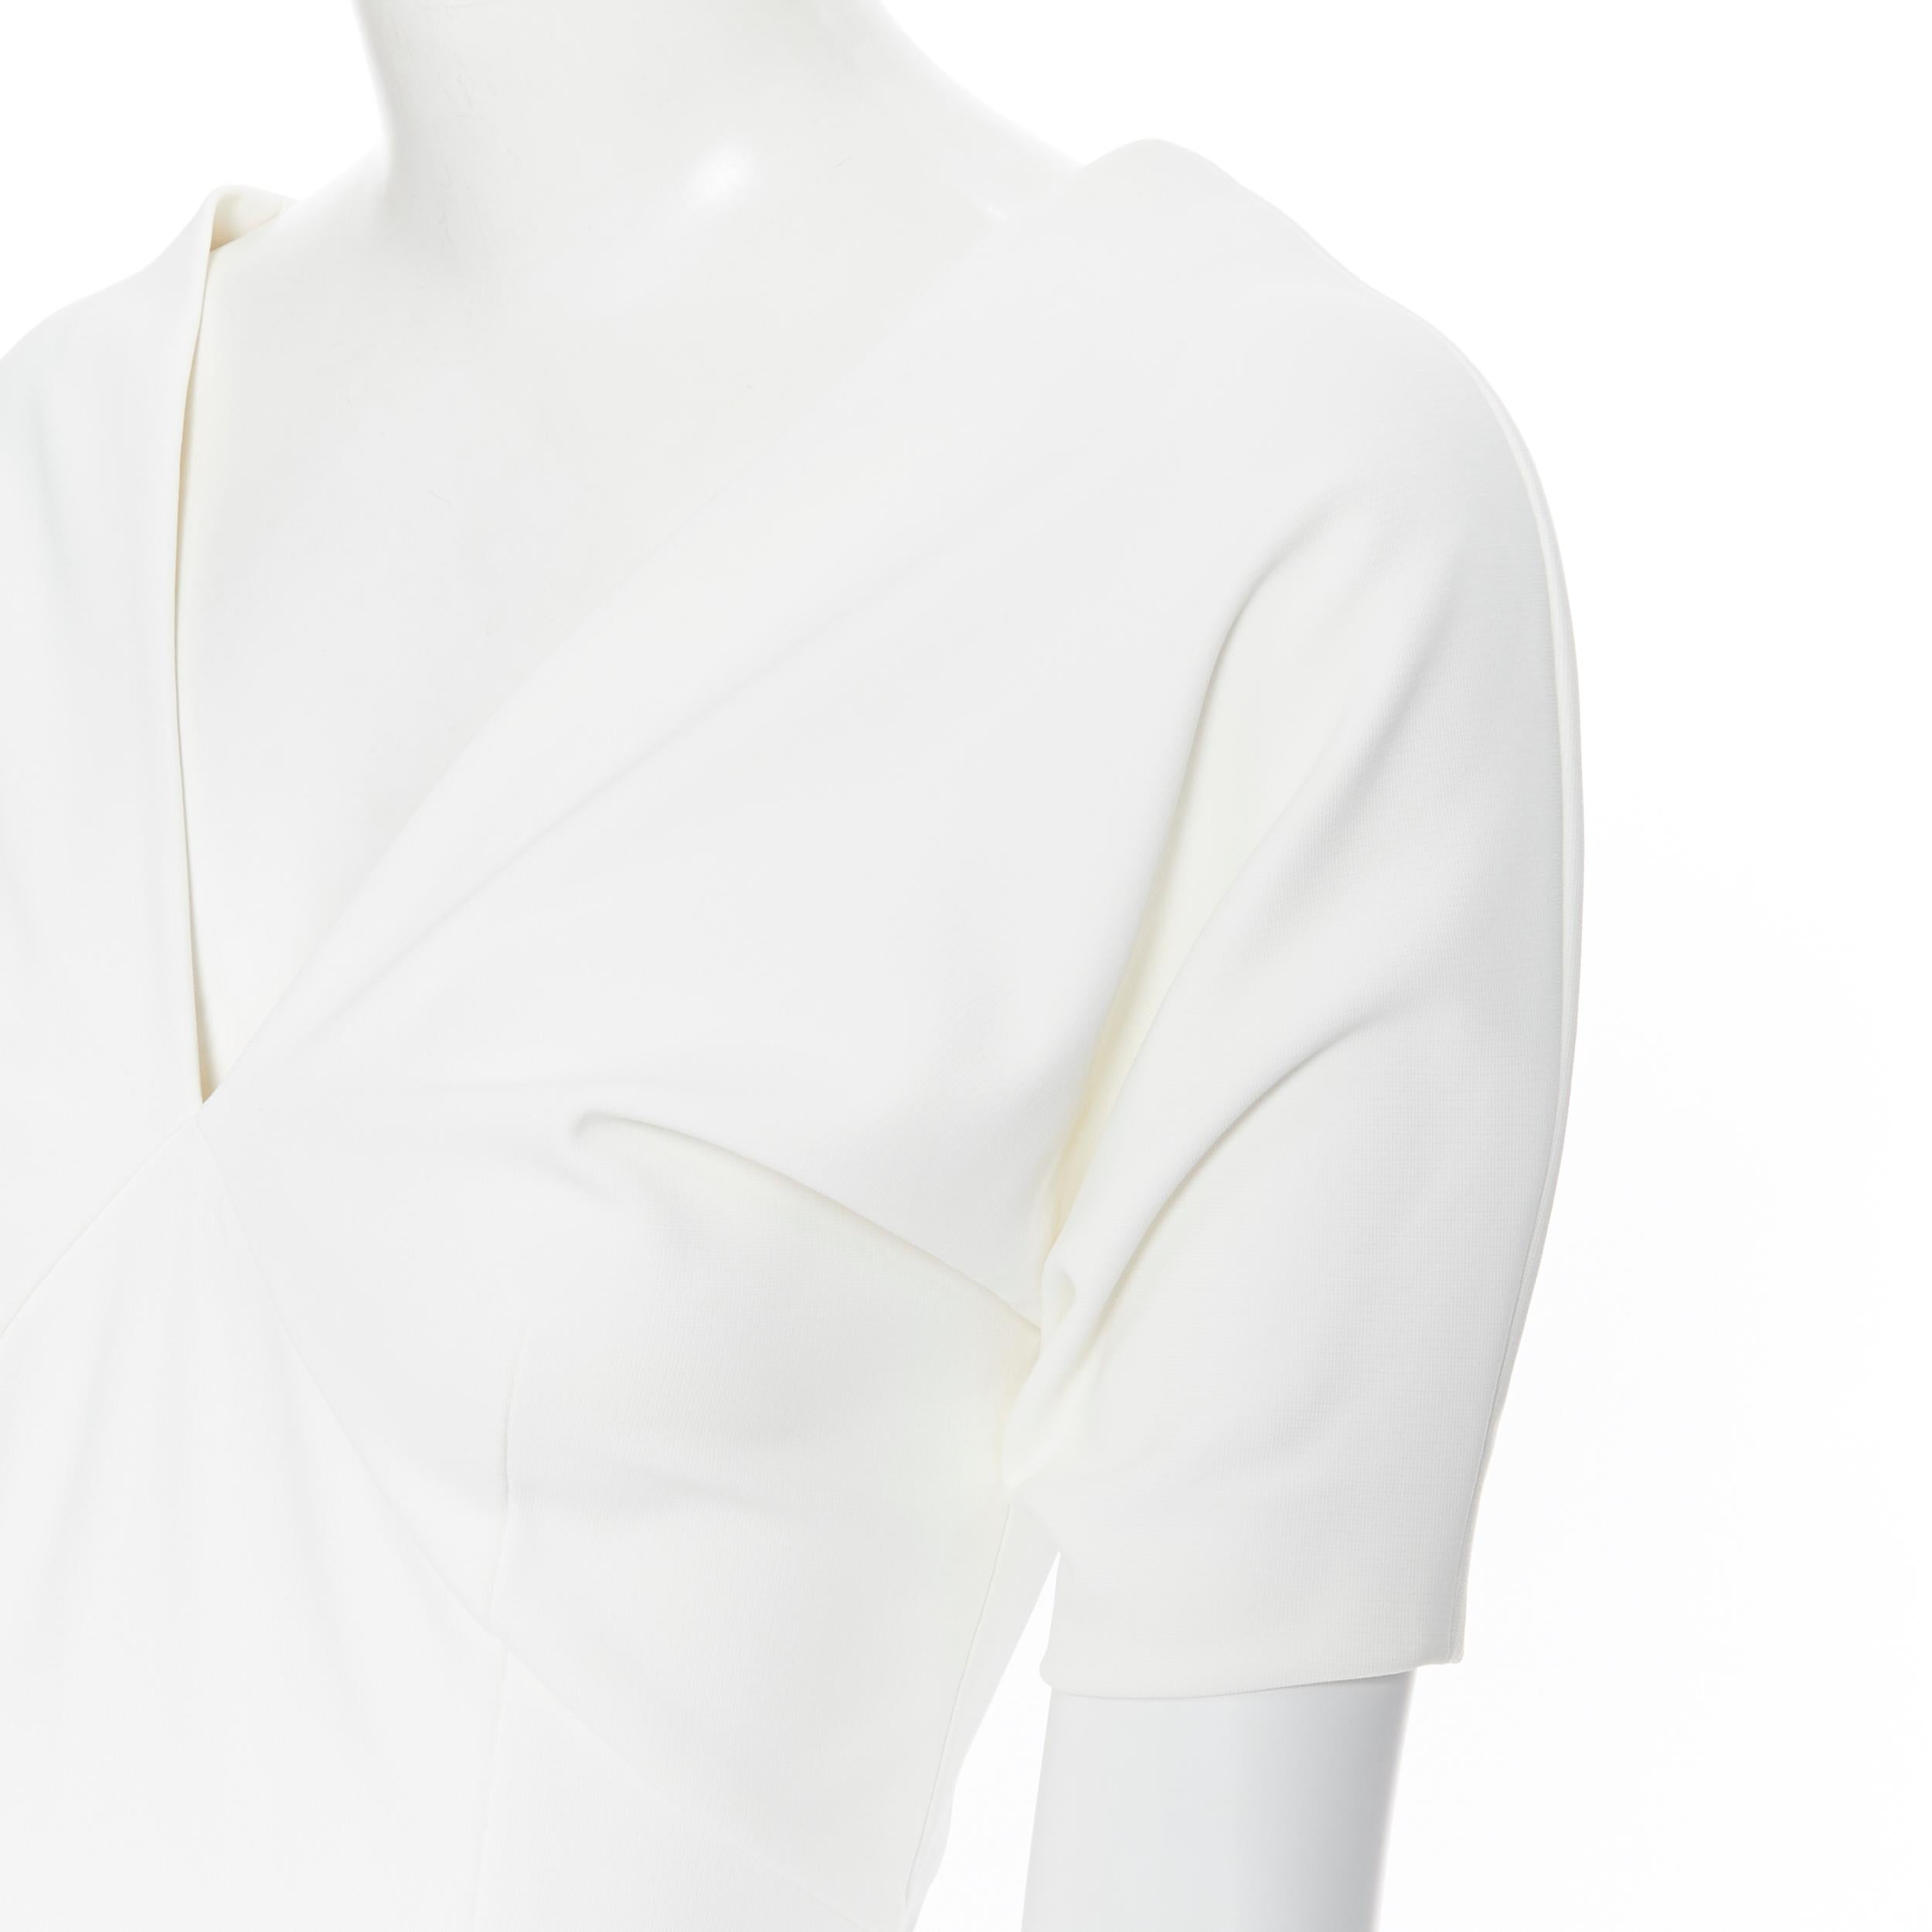 new HAIDER ACKERMANN Off Shoulder Mankora ivory white nylon top FR36 S
Brand: Haider Ackermann
Designer: Haider Ackermann
Model Name / Style: Mankora top
Material: Nylon
Color: White
Pattern: Solid
Extra Detail: Off shoulder top. Zip closure on side